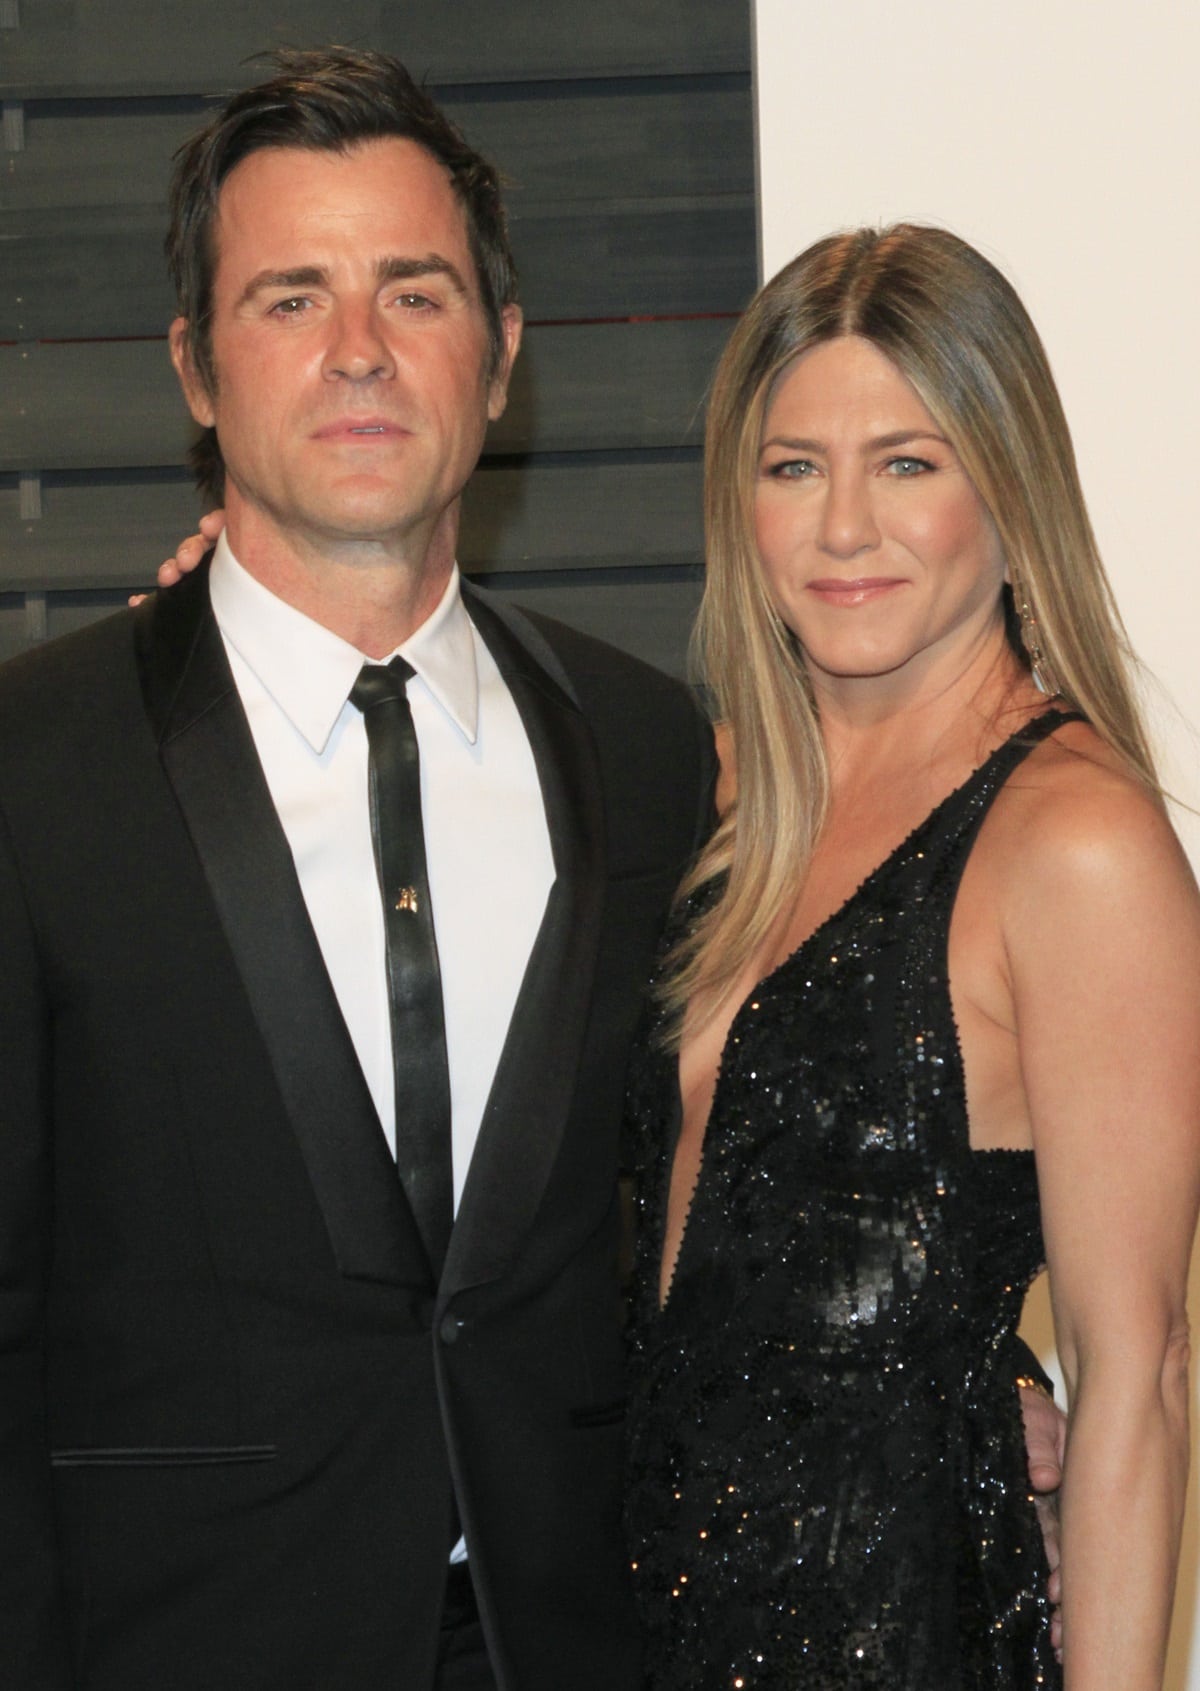 Jennifer Aniston and Justin Theroux married in a private ceremony in August 2015, announced their separation in February 2018 and finalized their divorce in October 2018